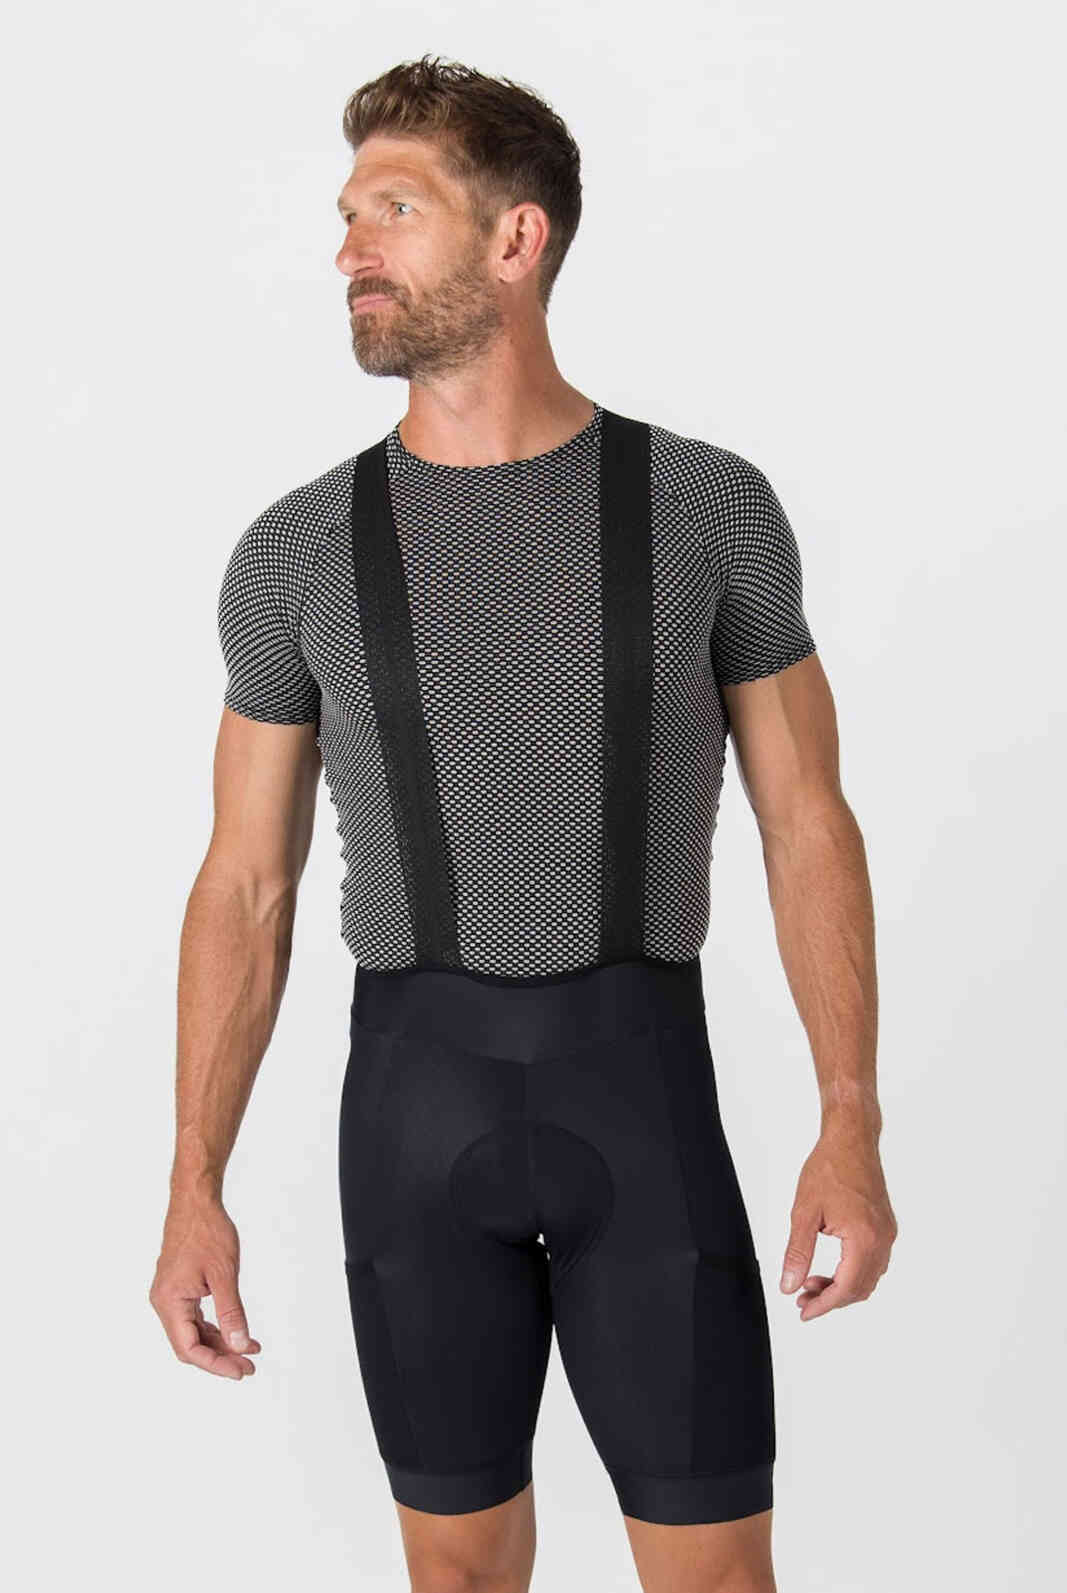 Men's Thermal Cycling Bibs - Front View